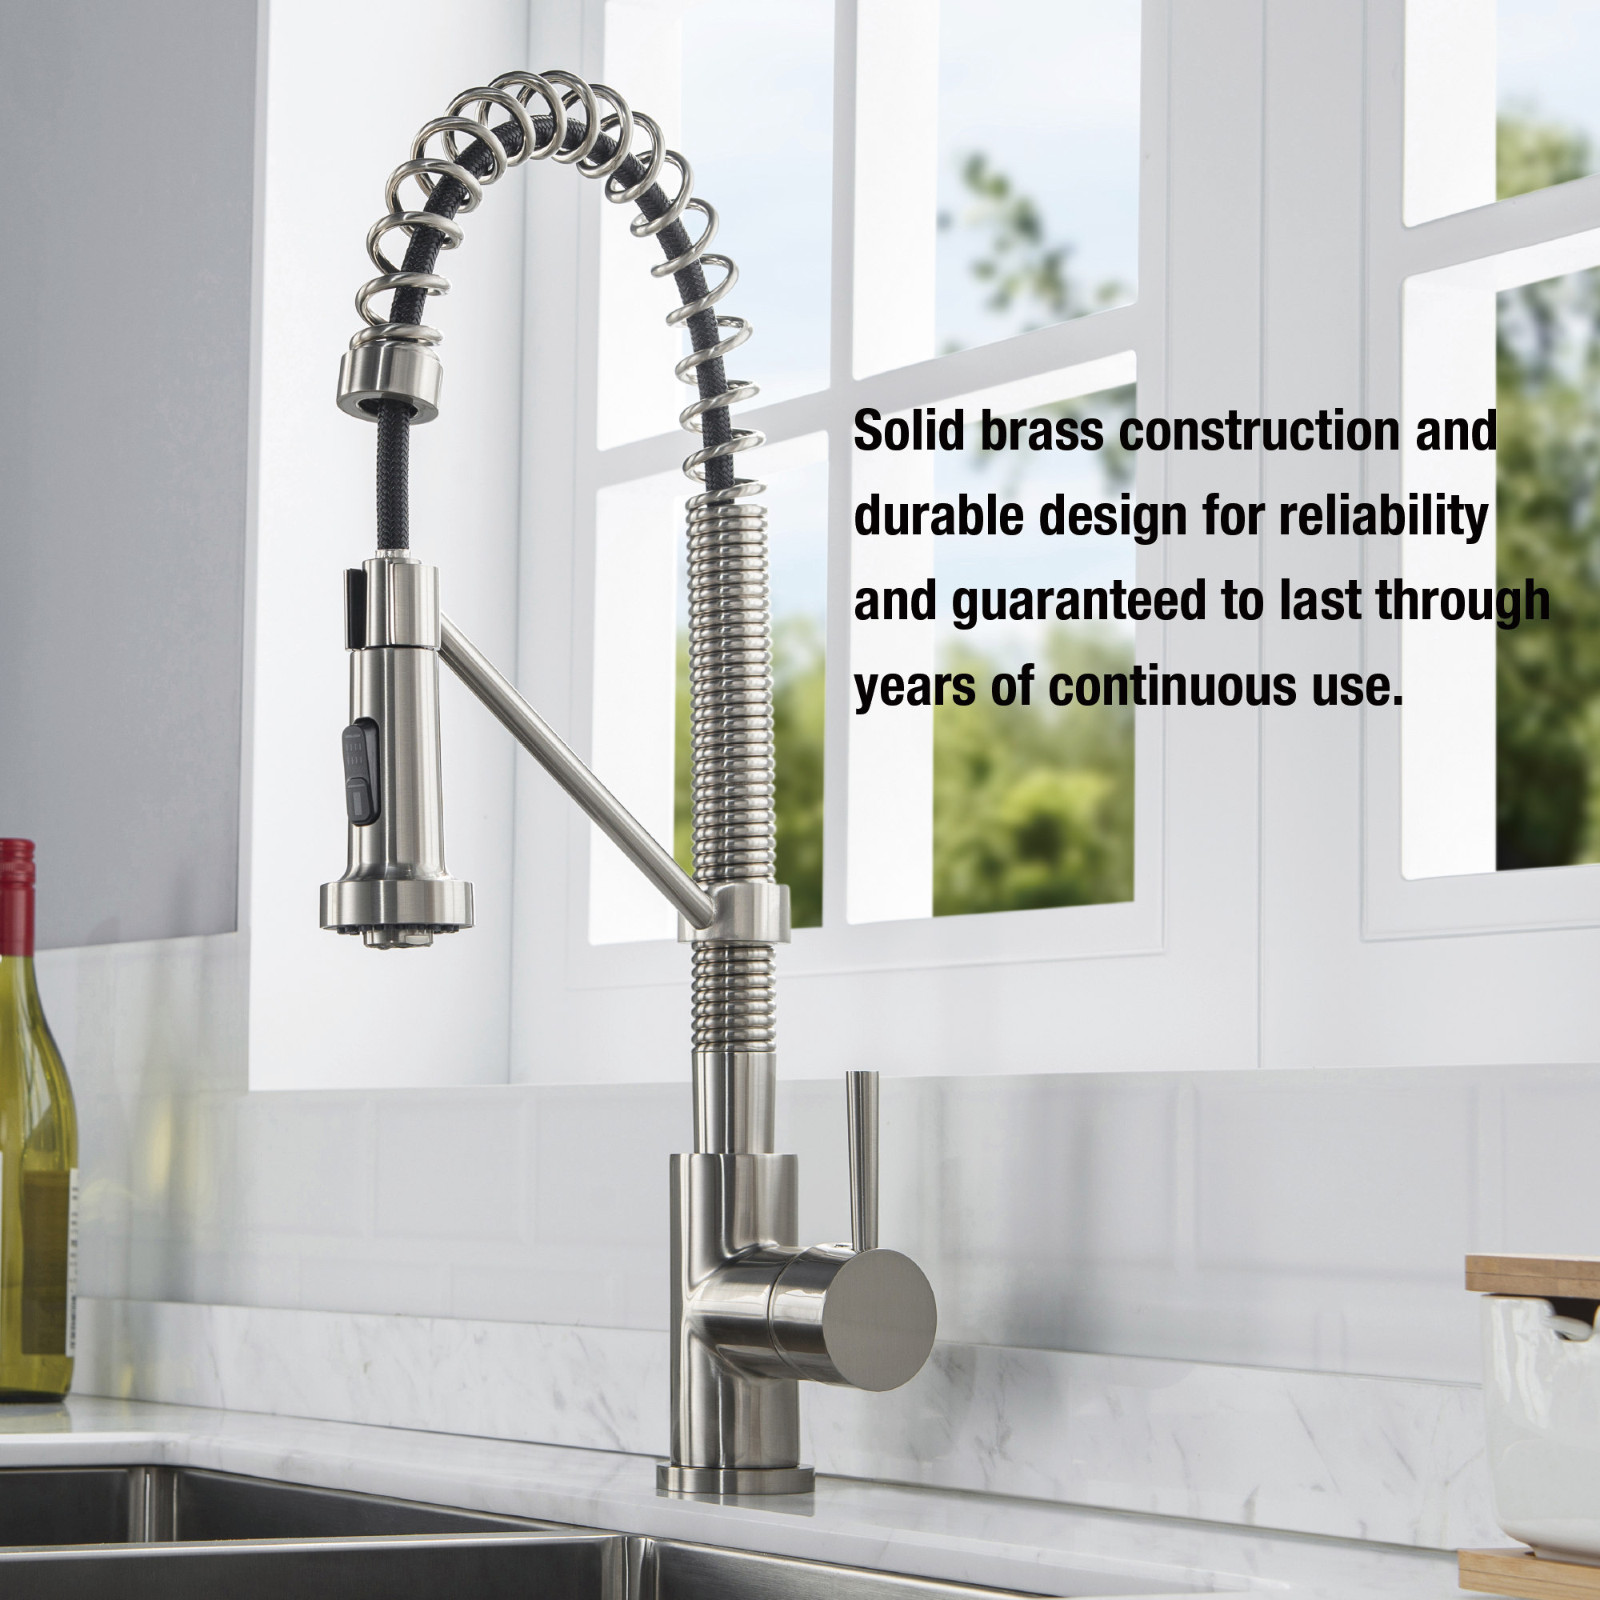  WOODBRIDGE WK010203BN Stainless Steel Single Handle Spring Coil Pre-Rinse Kitchen Faucet with Pull Down Sprayer, Brushed Nickel Finish_9469